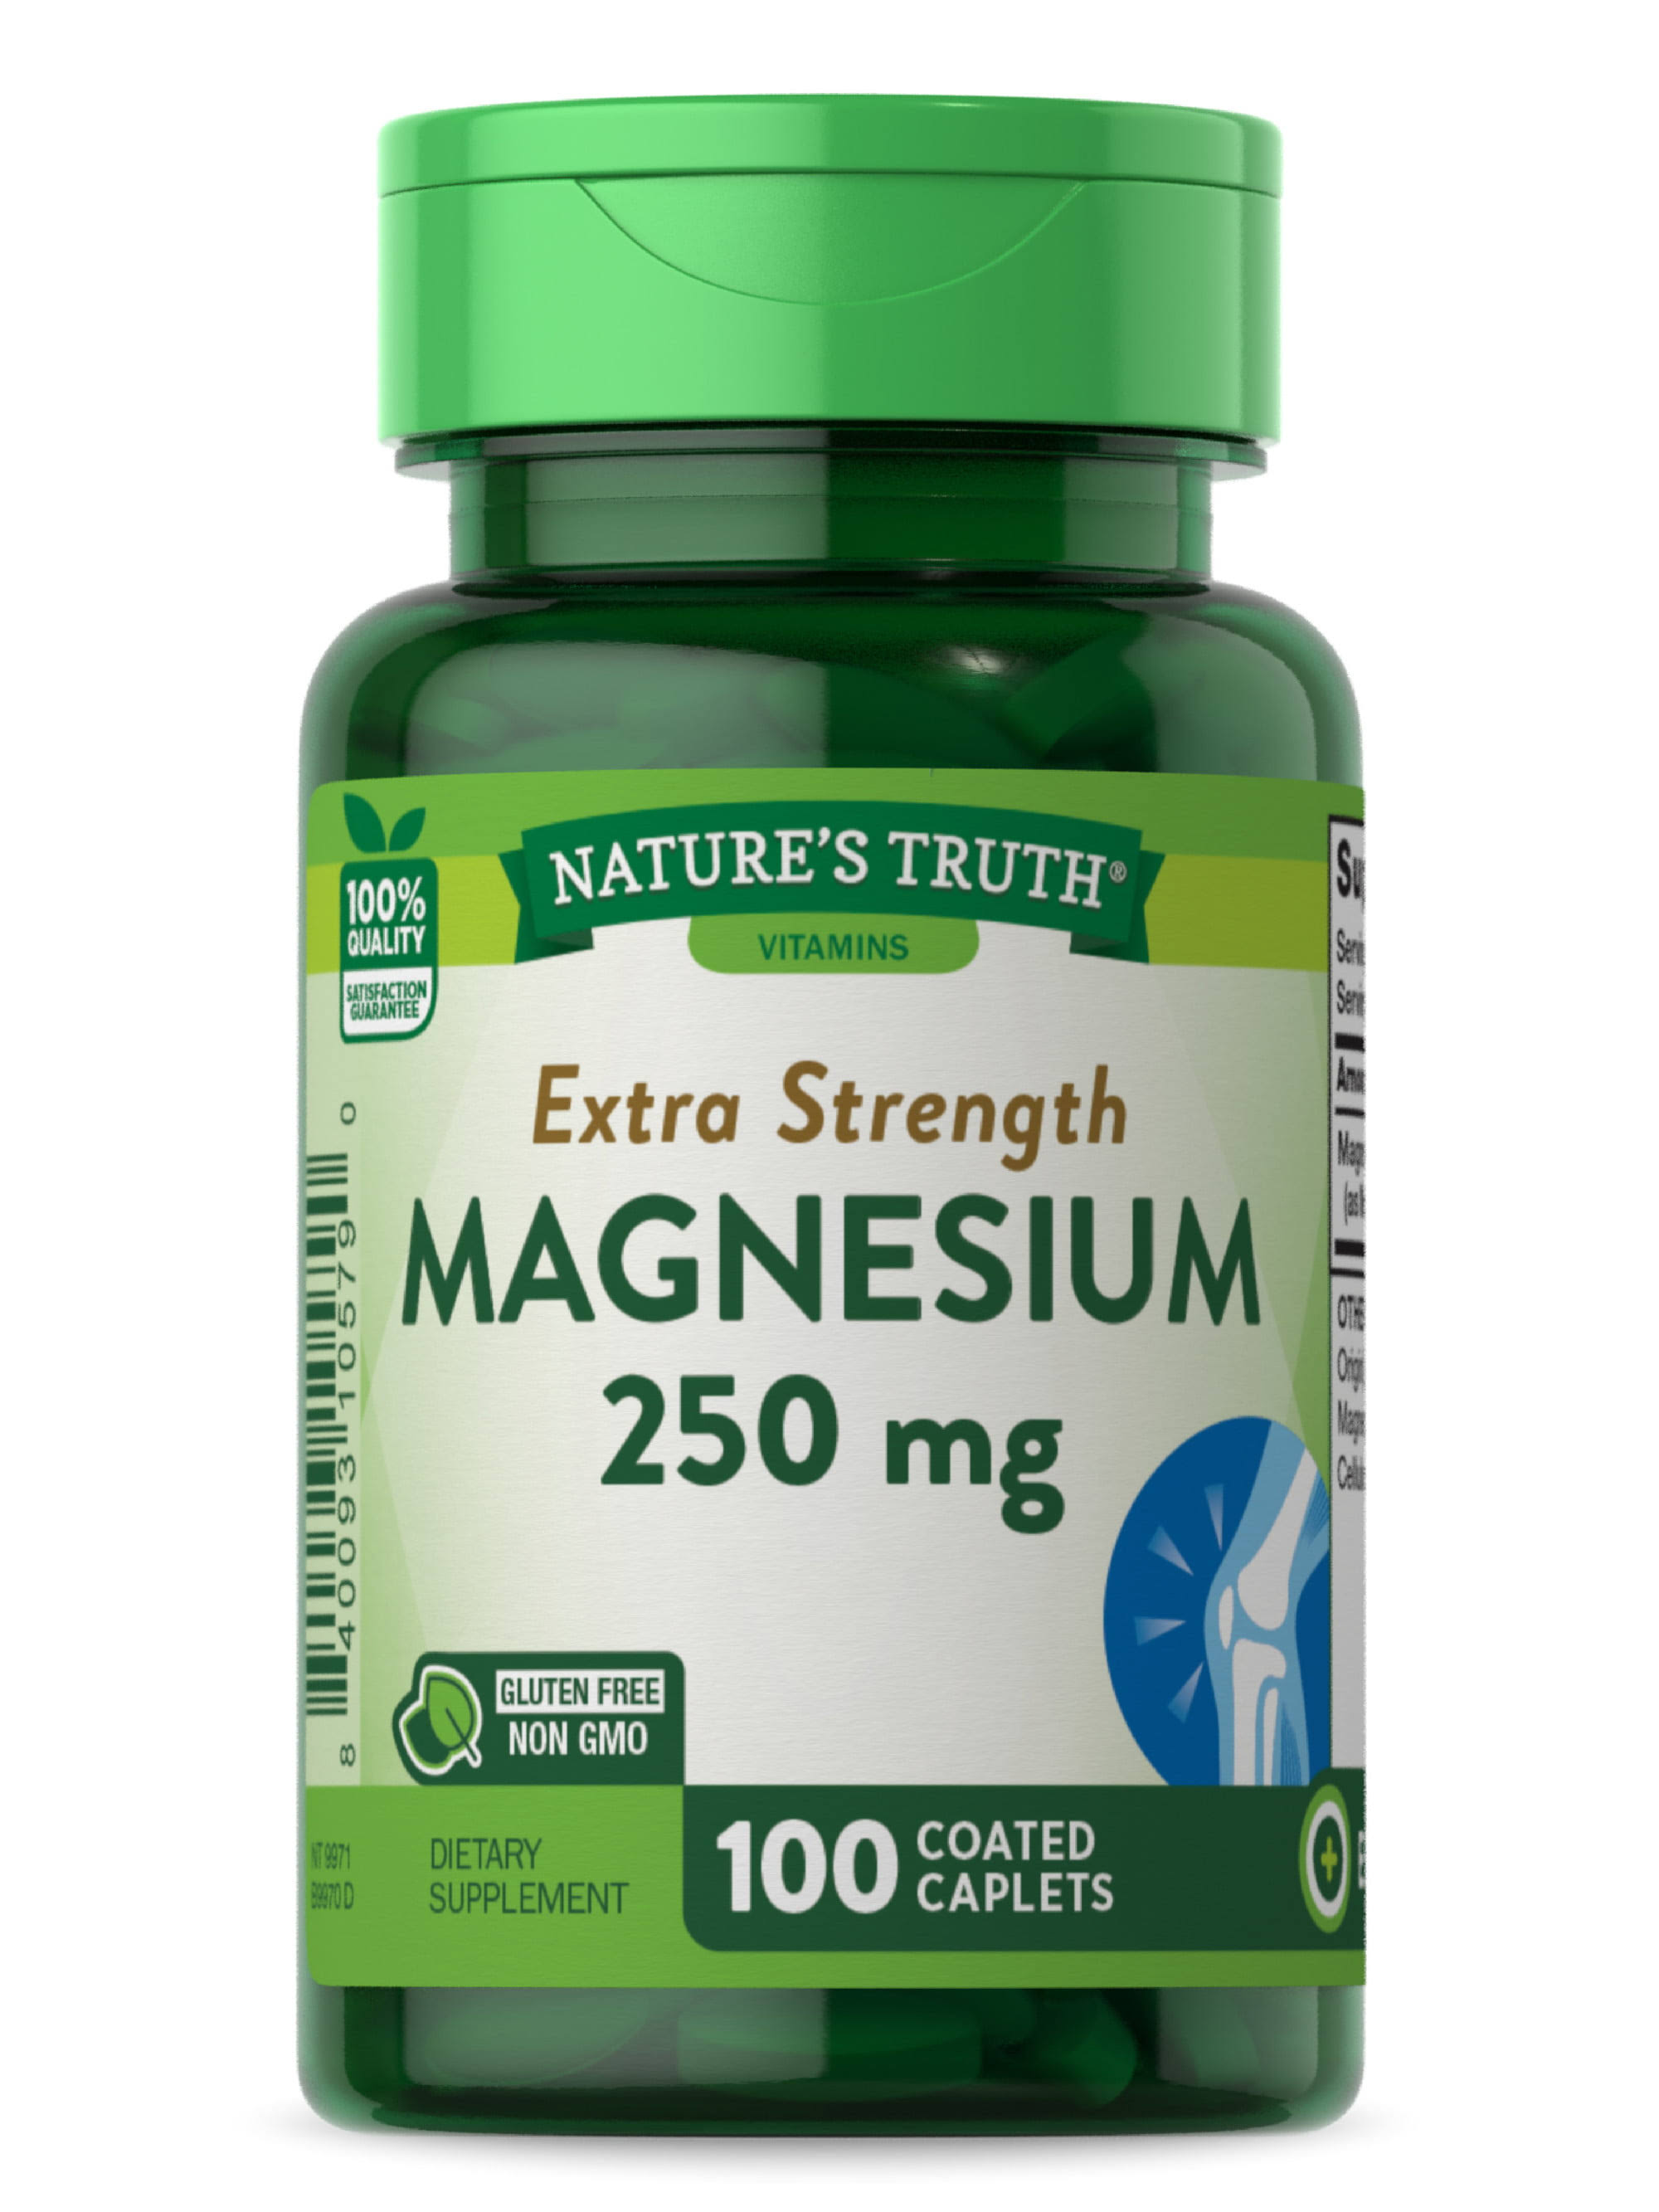 Natures Truth Magnesium Dietary Supplement - 250mg, 100ct